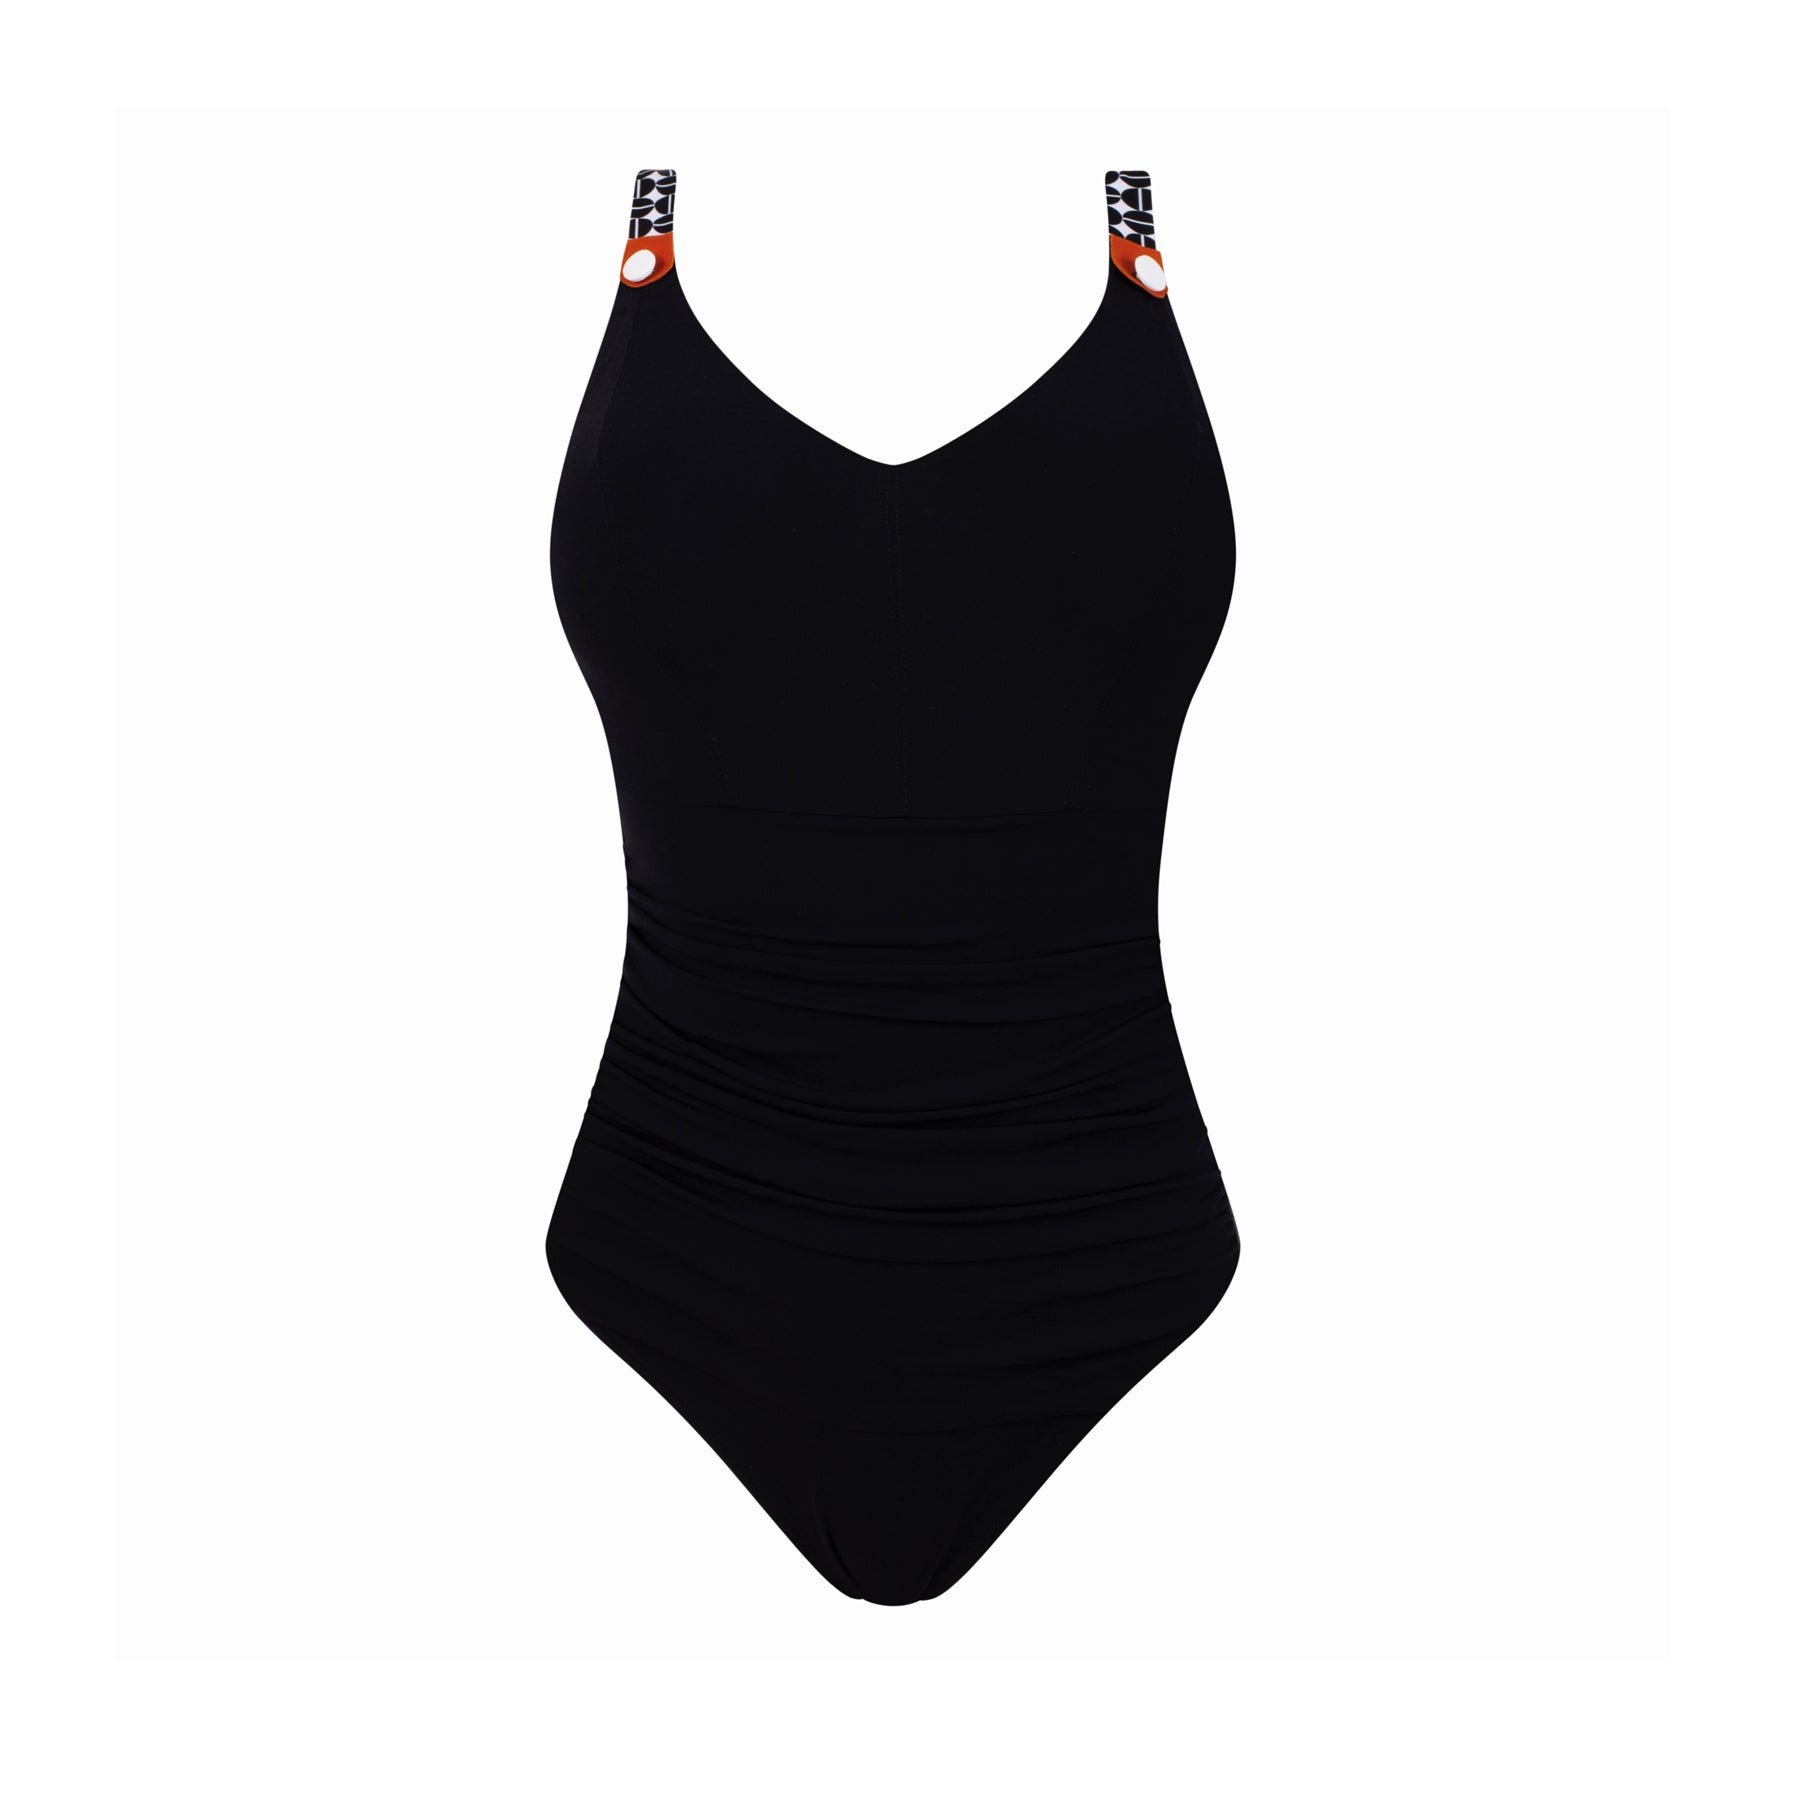 Keyhole Splicing Athletic One Piece Swimsuits-Black And White – Tempt Me